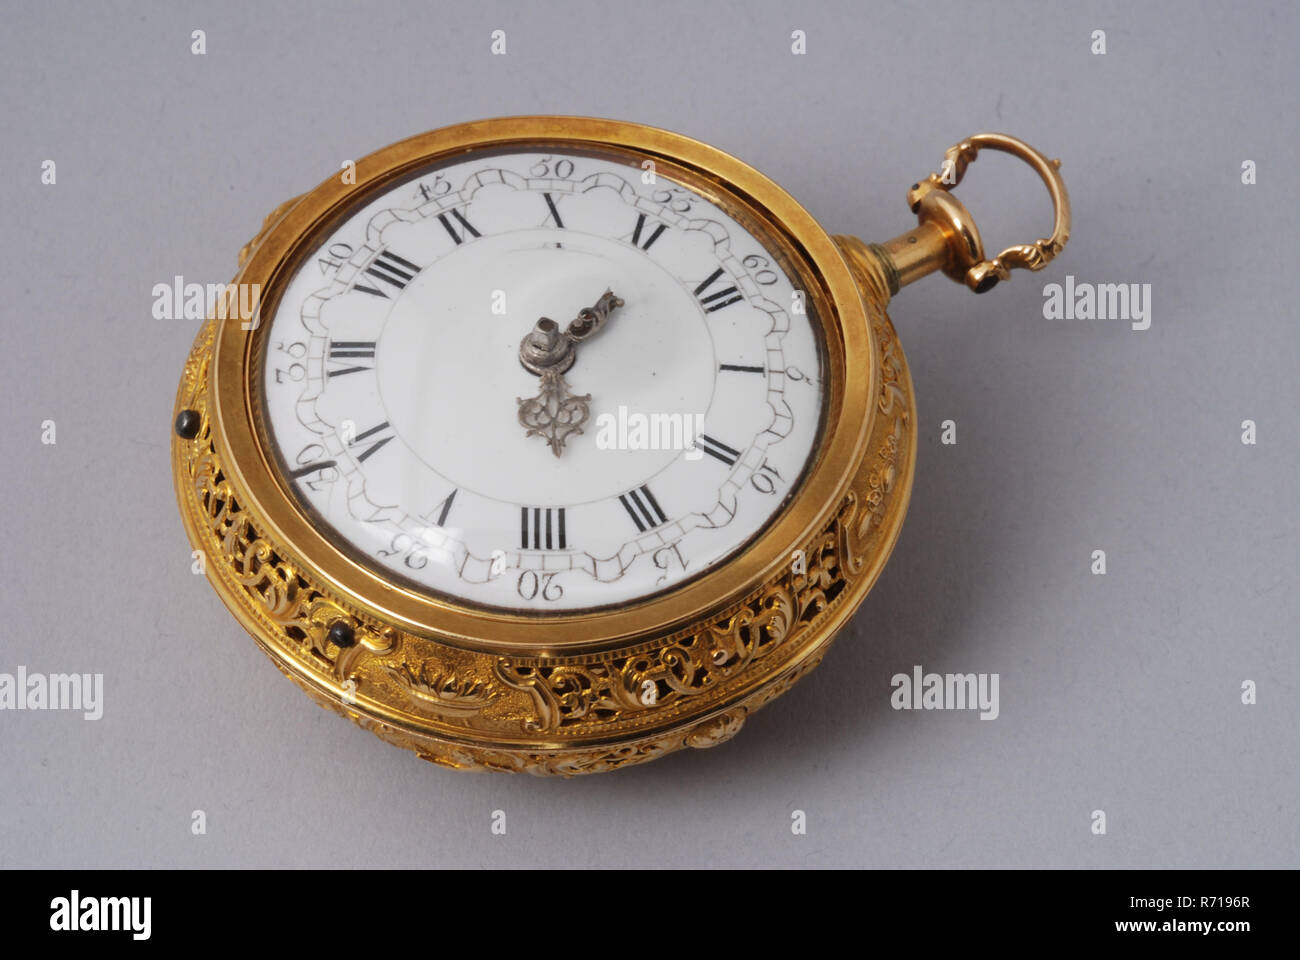 William Gib Junior, Pocket watch with golden ajour outside cabinet, ajour inner case with inset inside shell and dust case on movement, enamel dial, pocket watch watch movement measuring instrument gold enamel steel brass glass, box 6.0 White enamel dial with curved minute band with Arabic minute digits and Roman hour digits. Ajourge sawed steel hands The clock with spindle and repetition mechanism for hours and quarters. Simple round pillars. The back plate with an ajour sawed bridge in asymmetrical ornamentation and ditto ornament screwed with blued screws Silver plated 'compass' with the nu Stock Photo